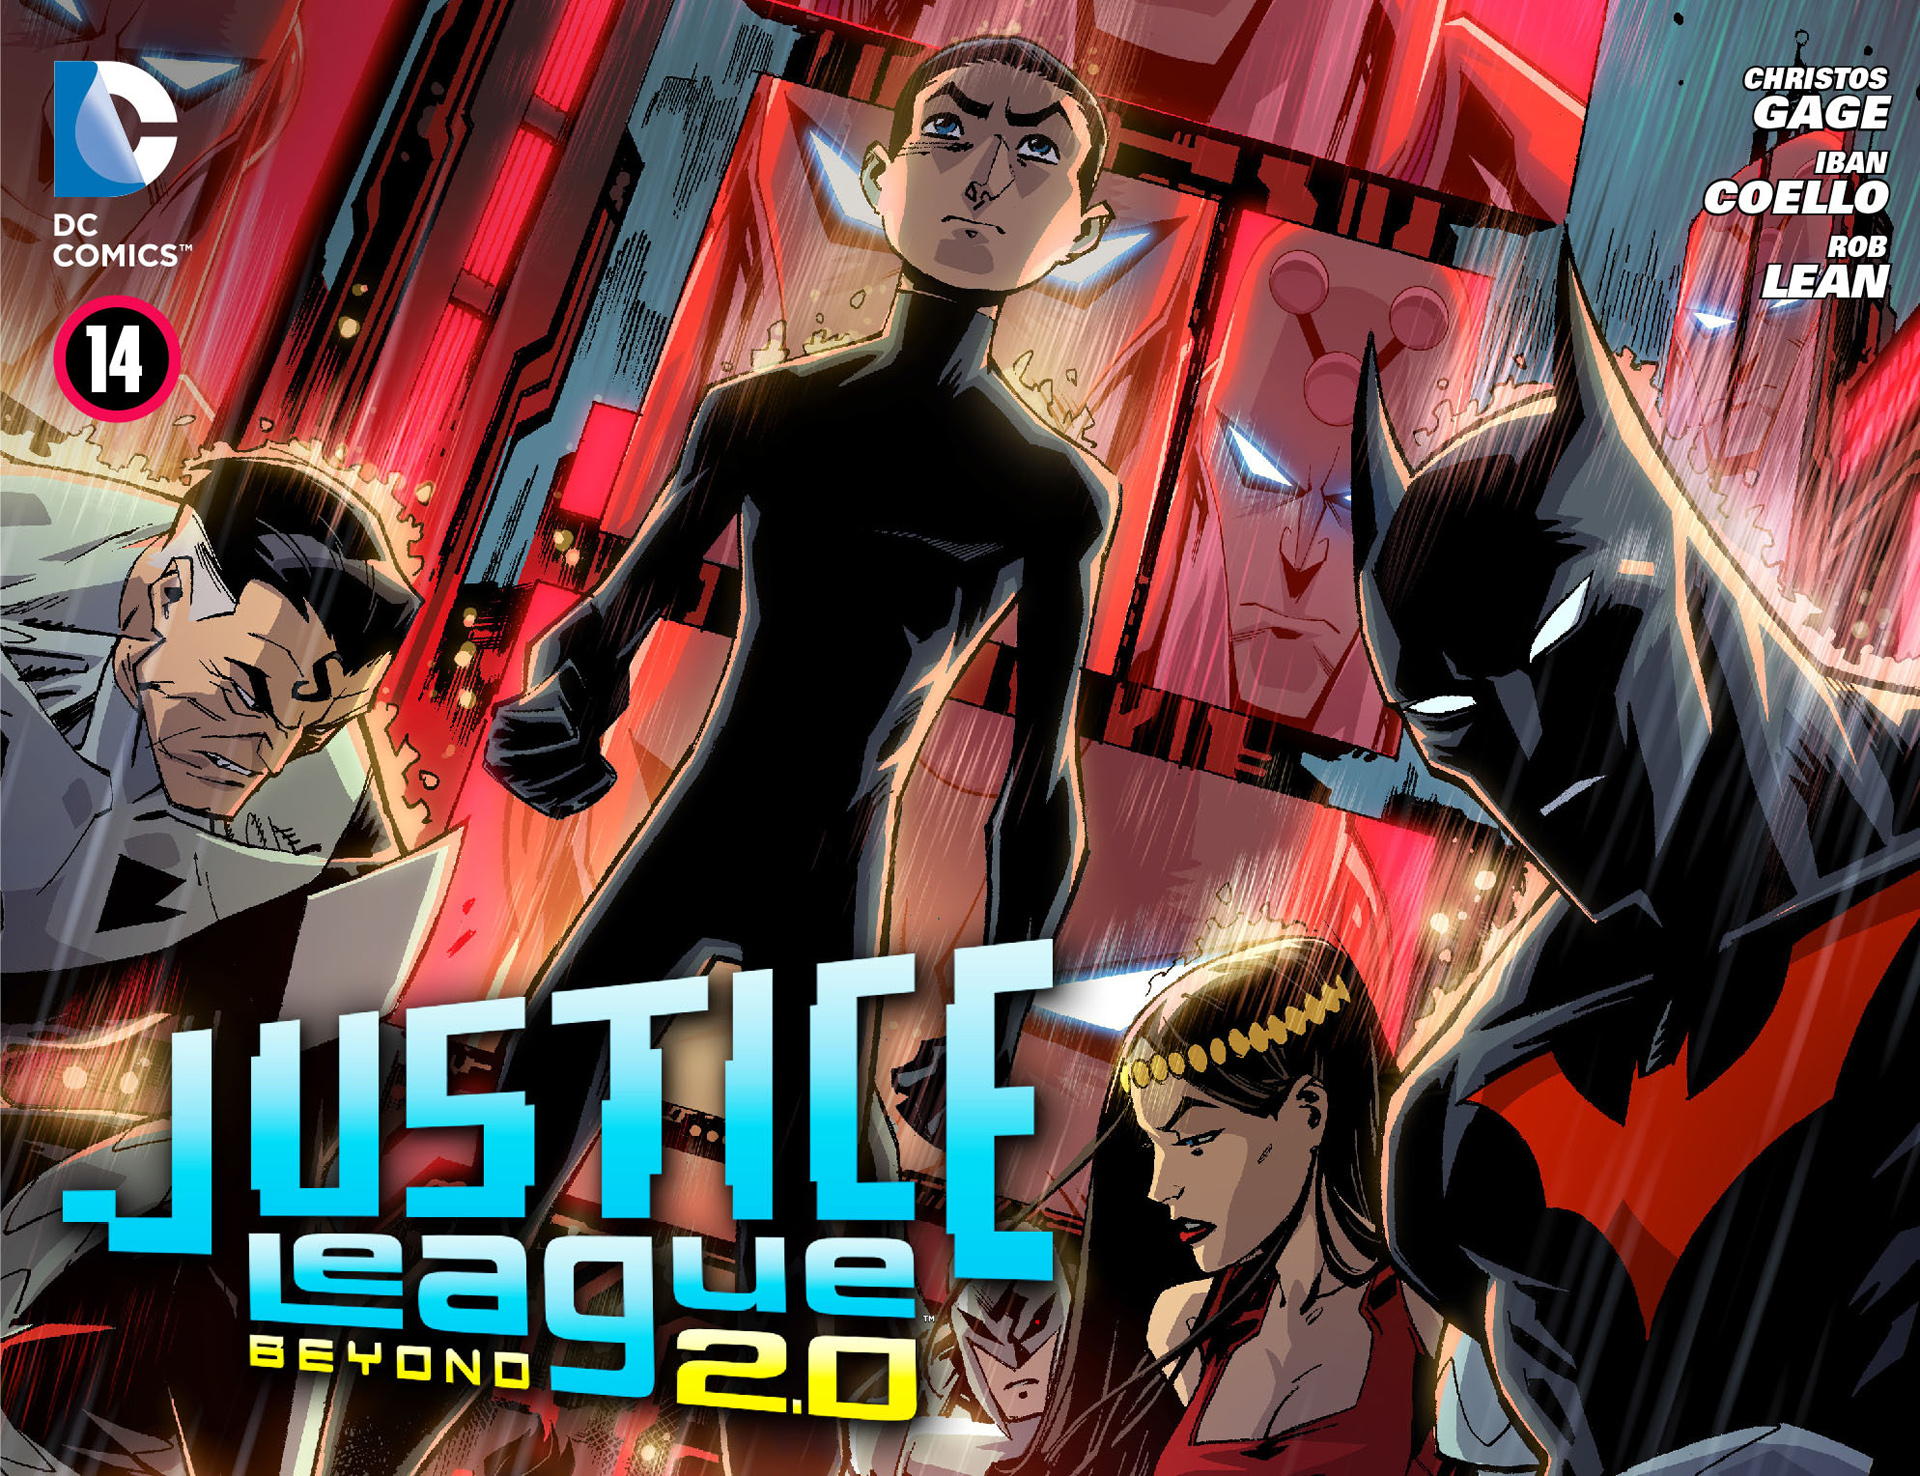 Read online Justice League Beyond 2.0 comic -  Issue #14 - 1